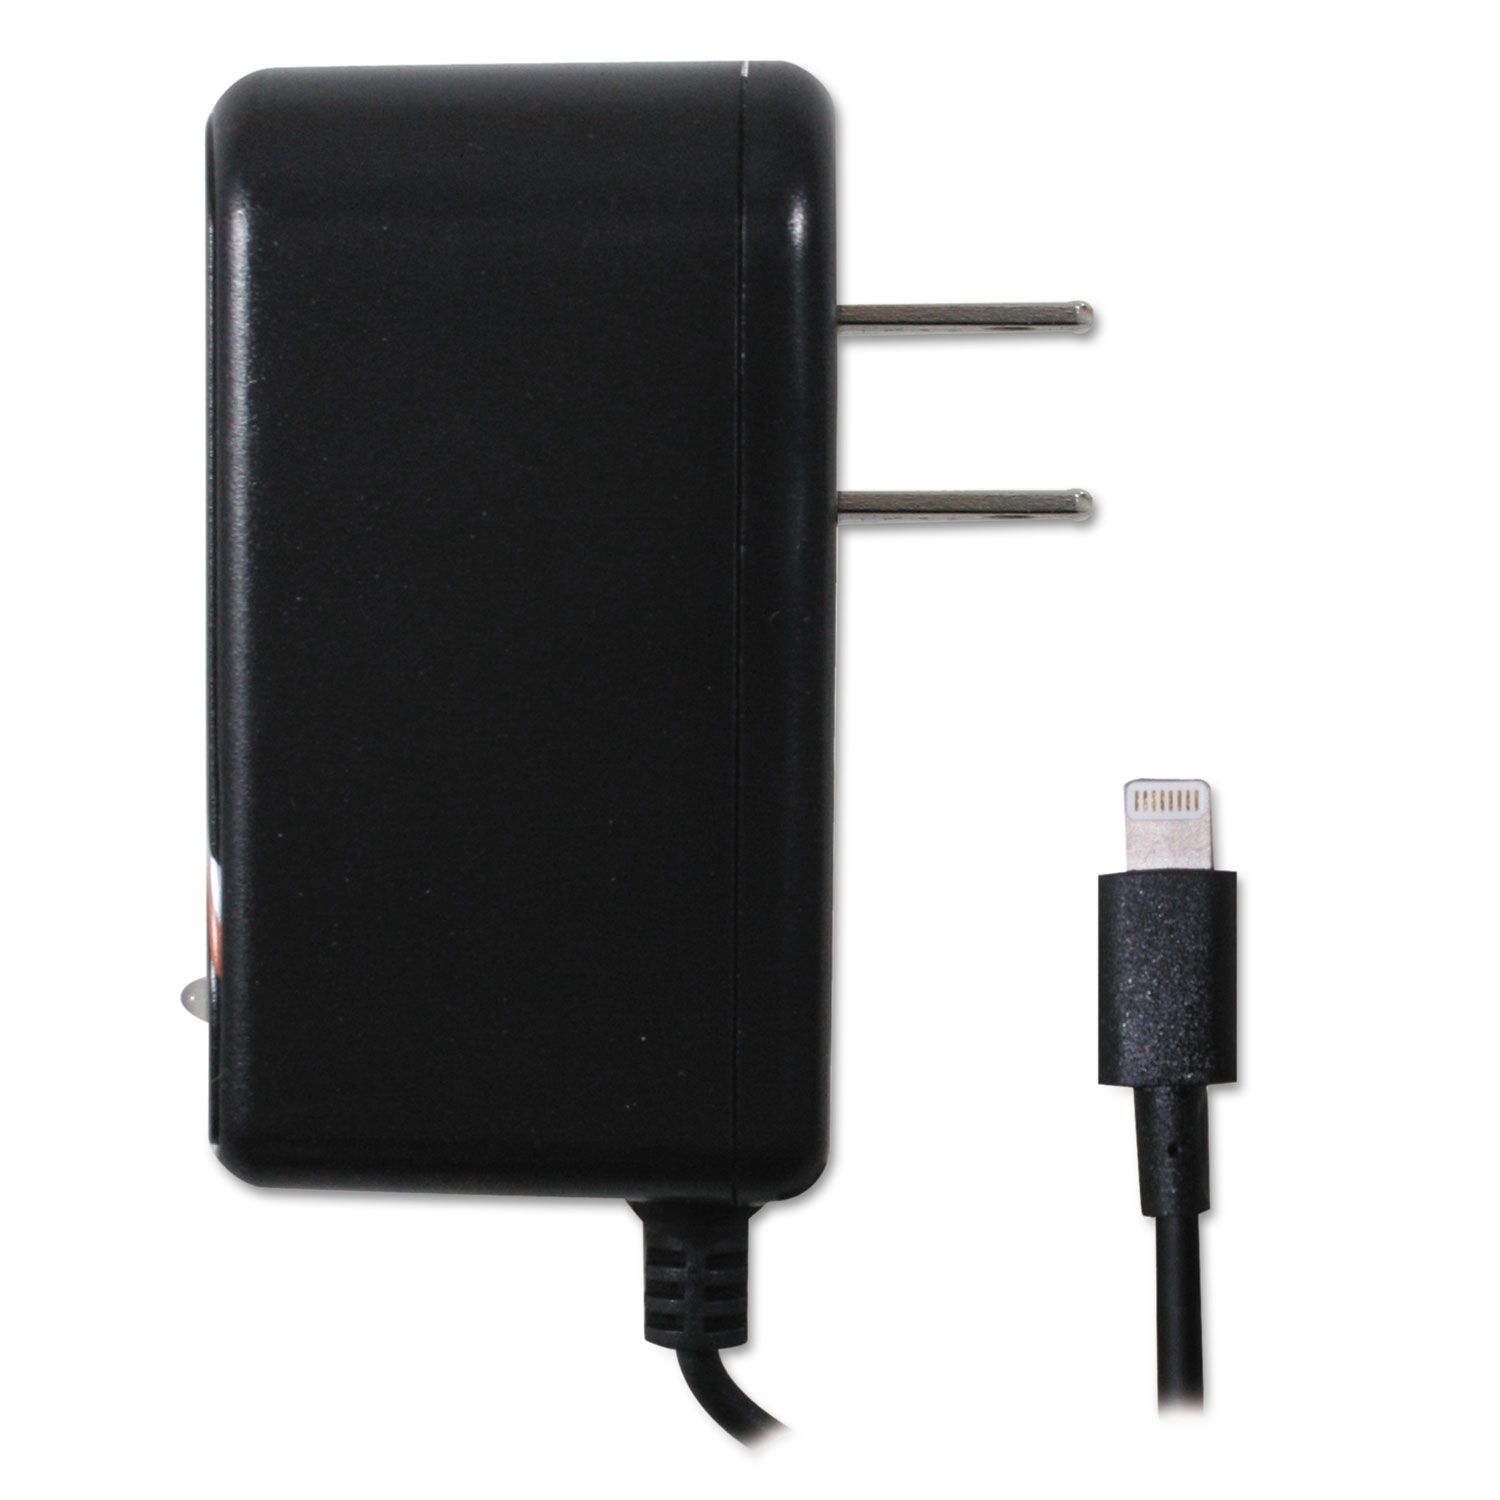 Wall Charger for iPhone 5/5s, Lightning Connector